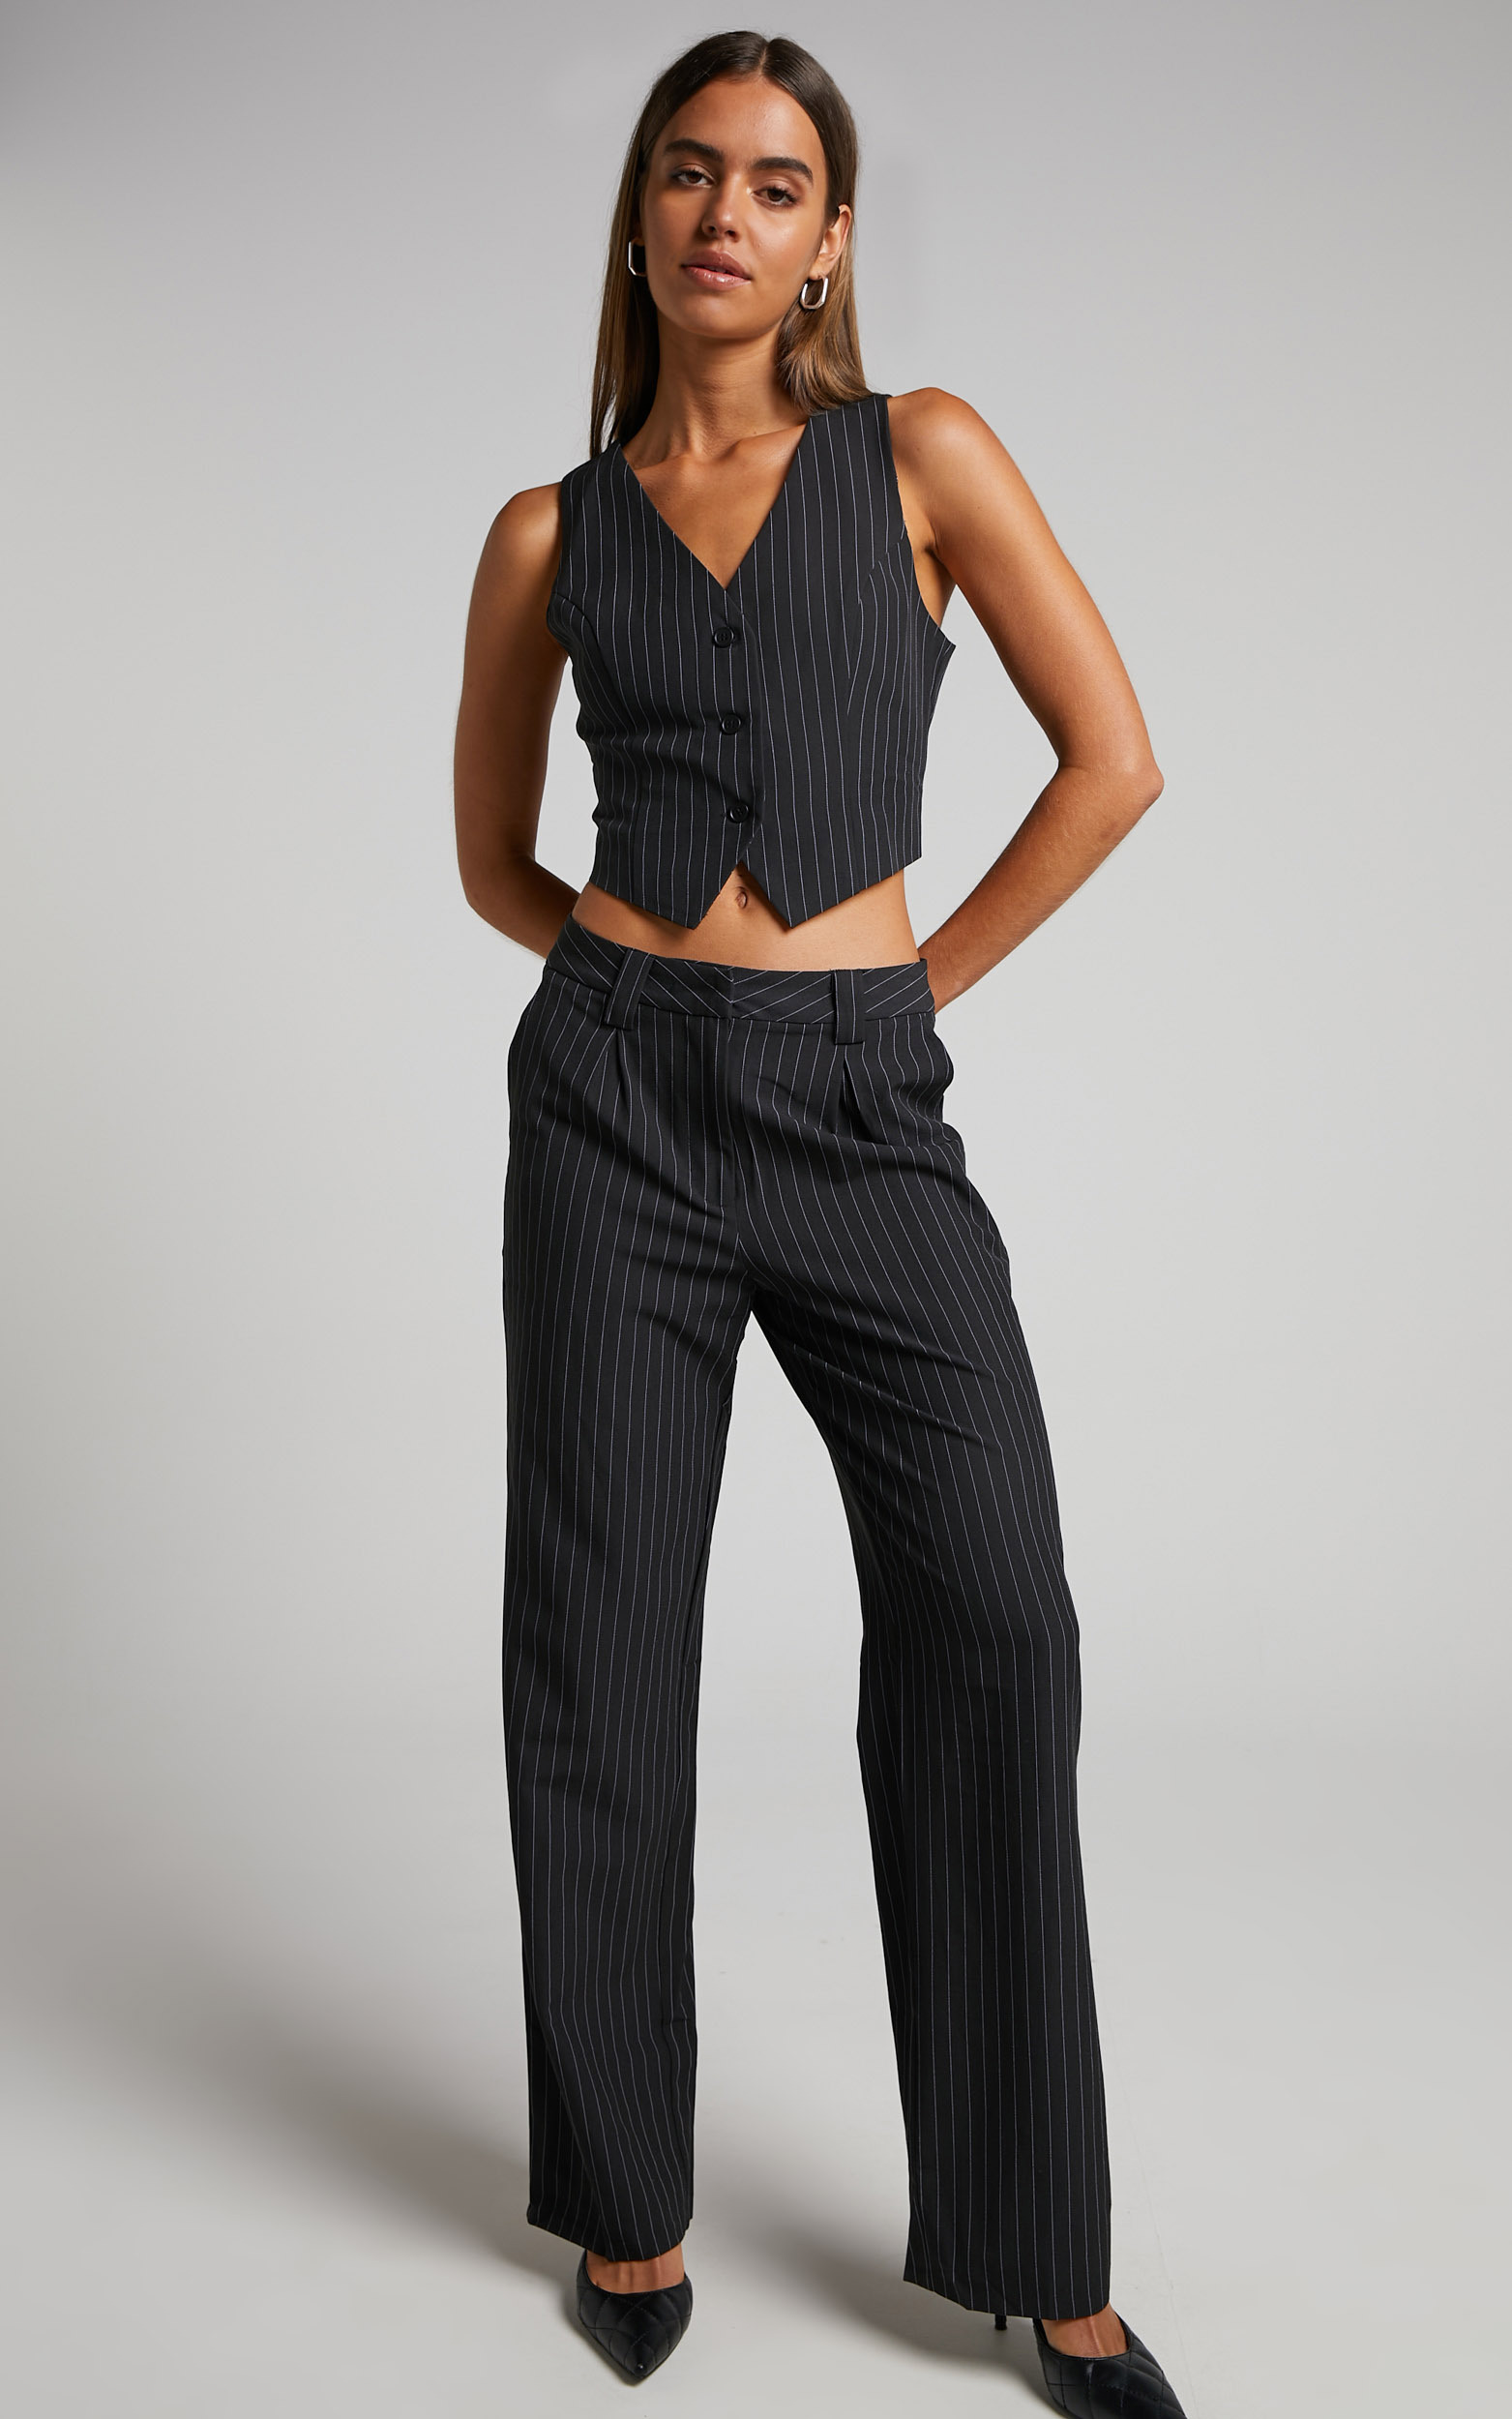 Queennie Trousers - Relaxed Straight Leg Tailored Trousers in Black Pinstripe - 06, BLK1, hi-res image number null